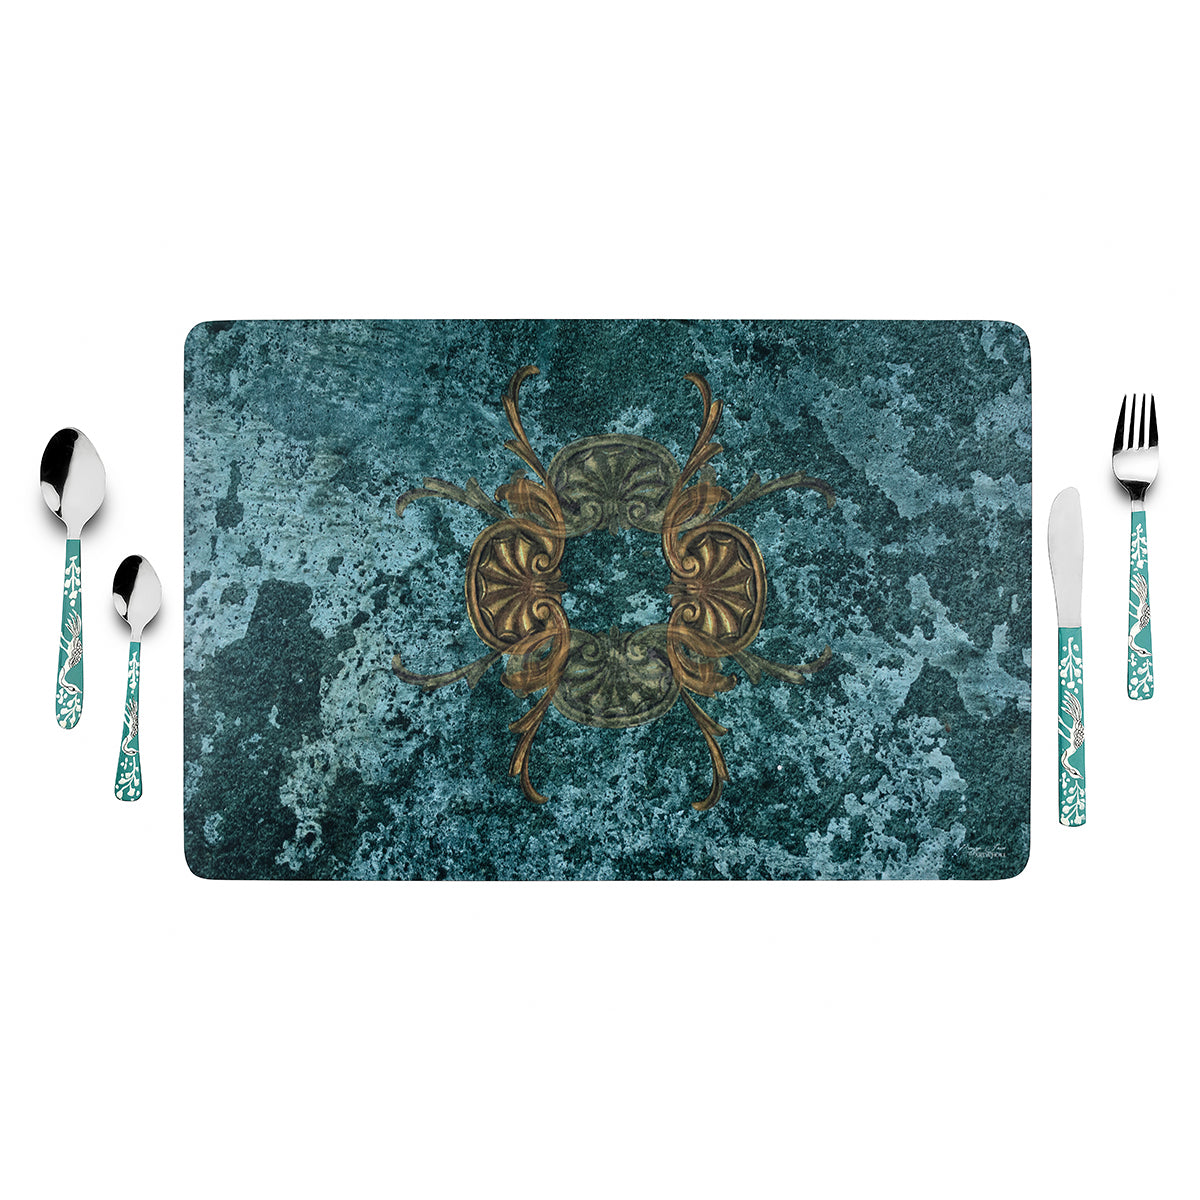 Carved Motif Table Mats